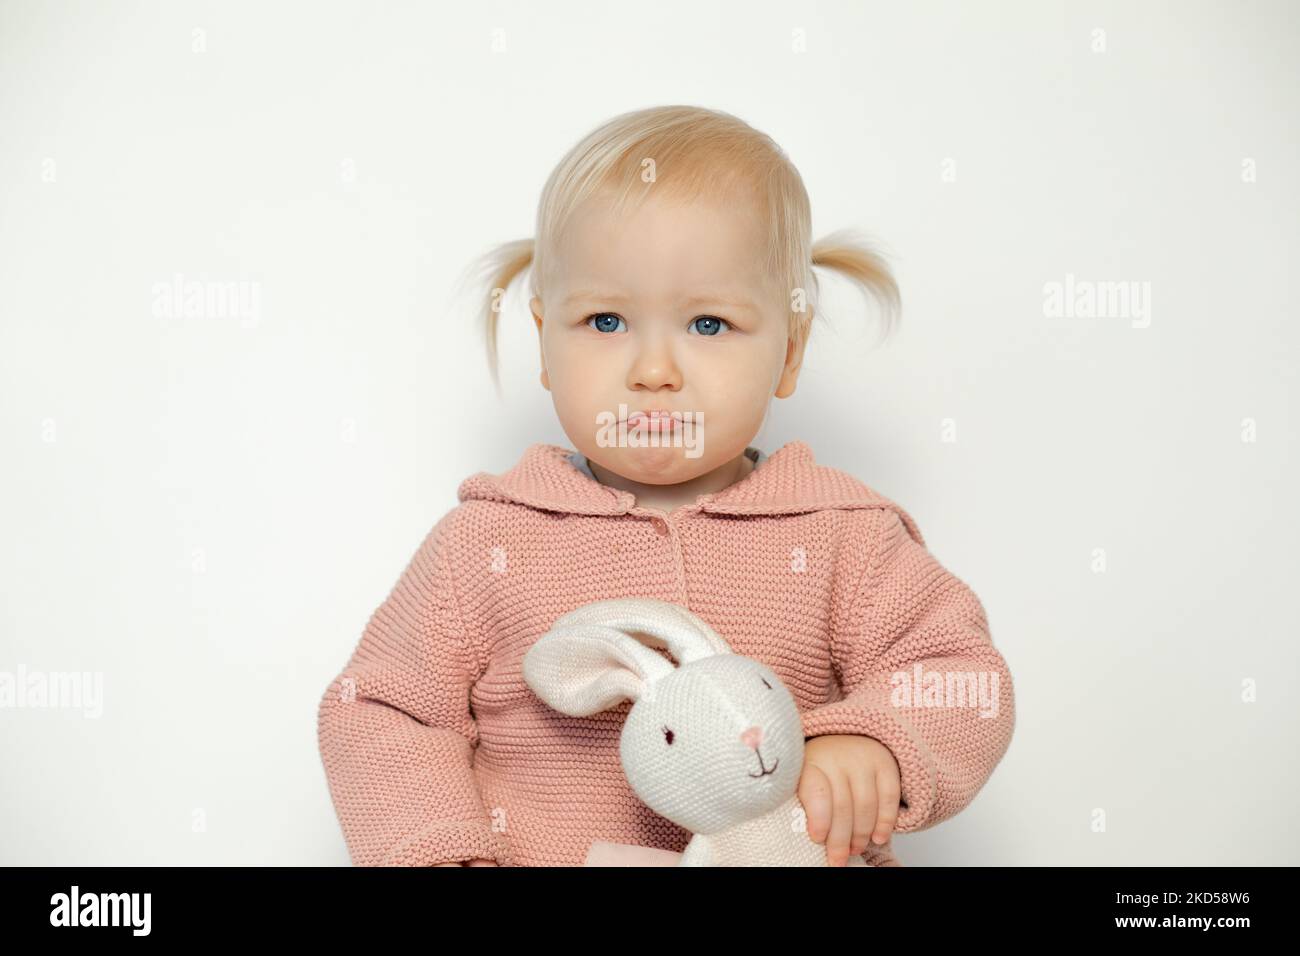 Little baby girl play with stuffed animal isolated on white. Toddler with sad facial expression holding teddy bunny. Blonde haired child in pink Stock Photo